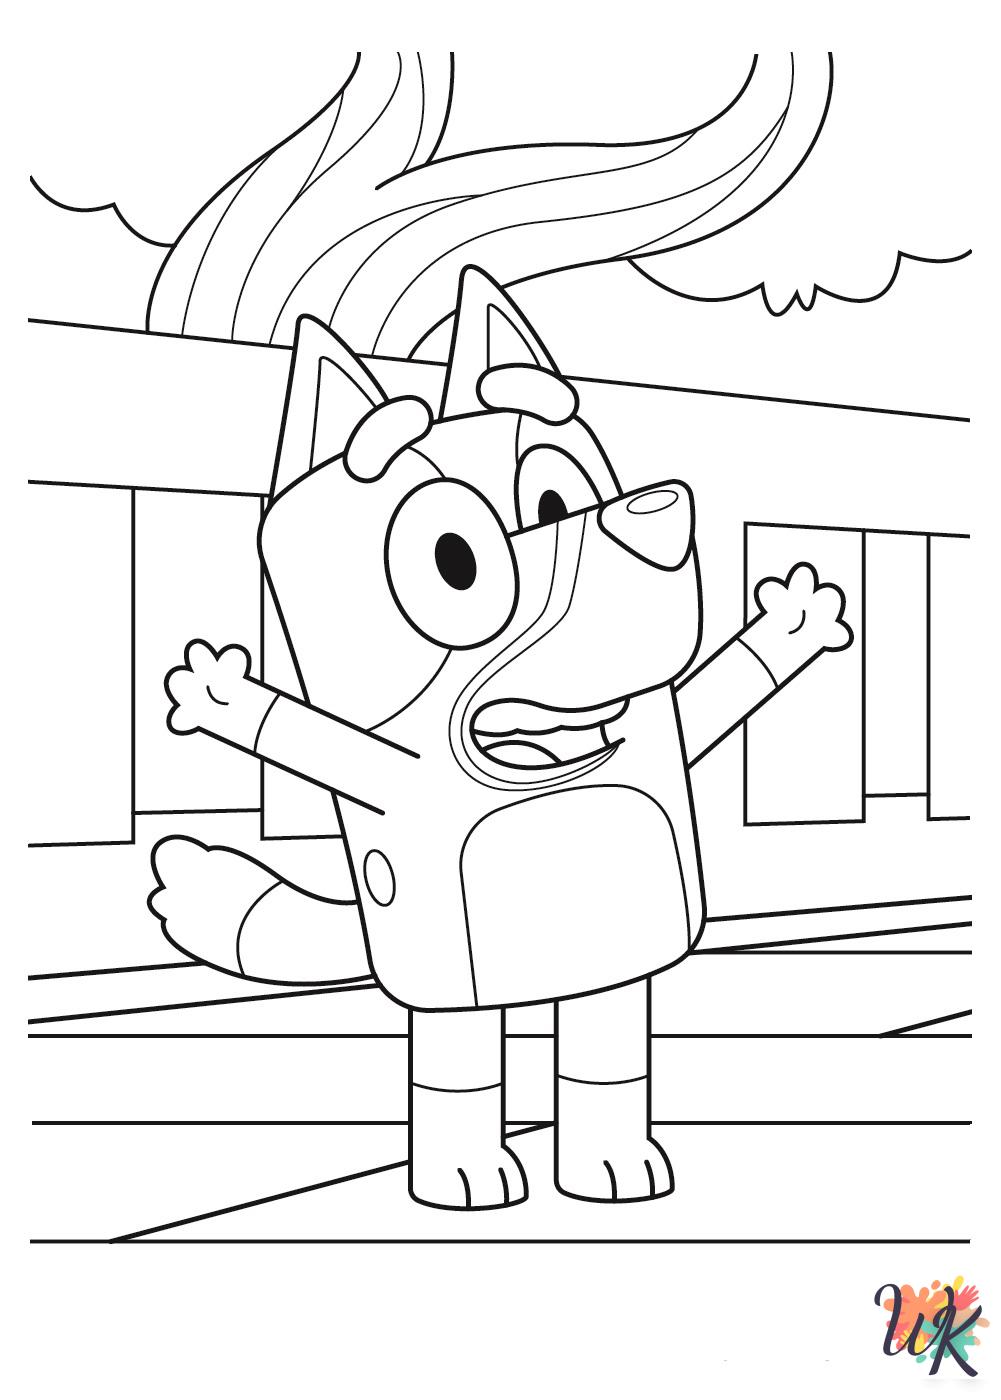 Bluey coloring pages for kids